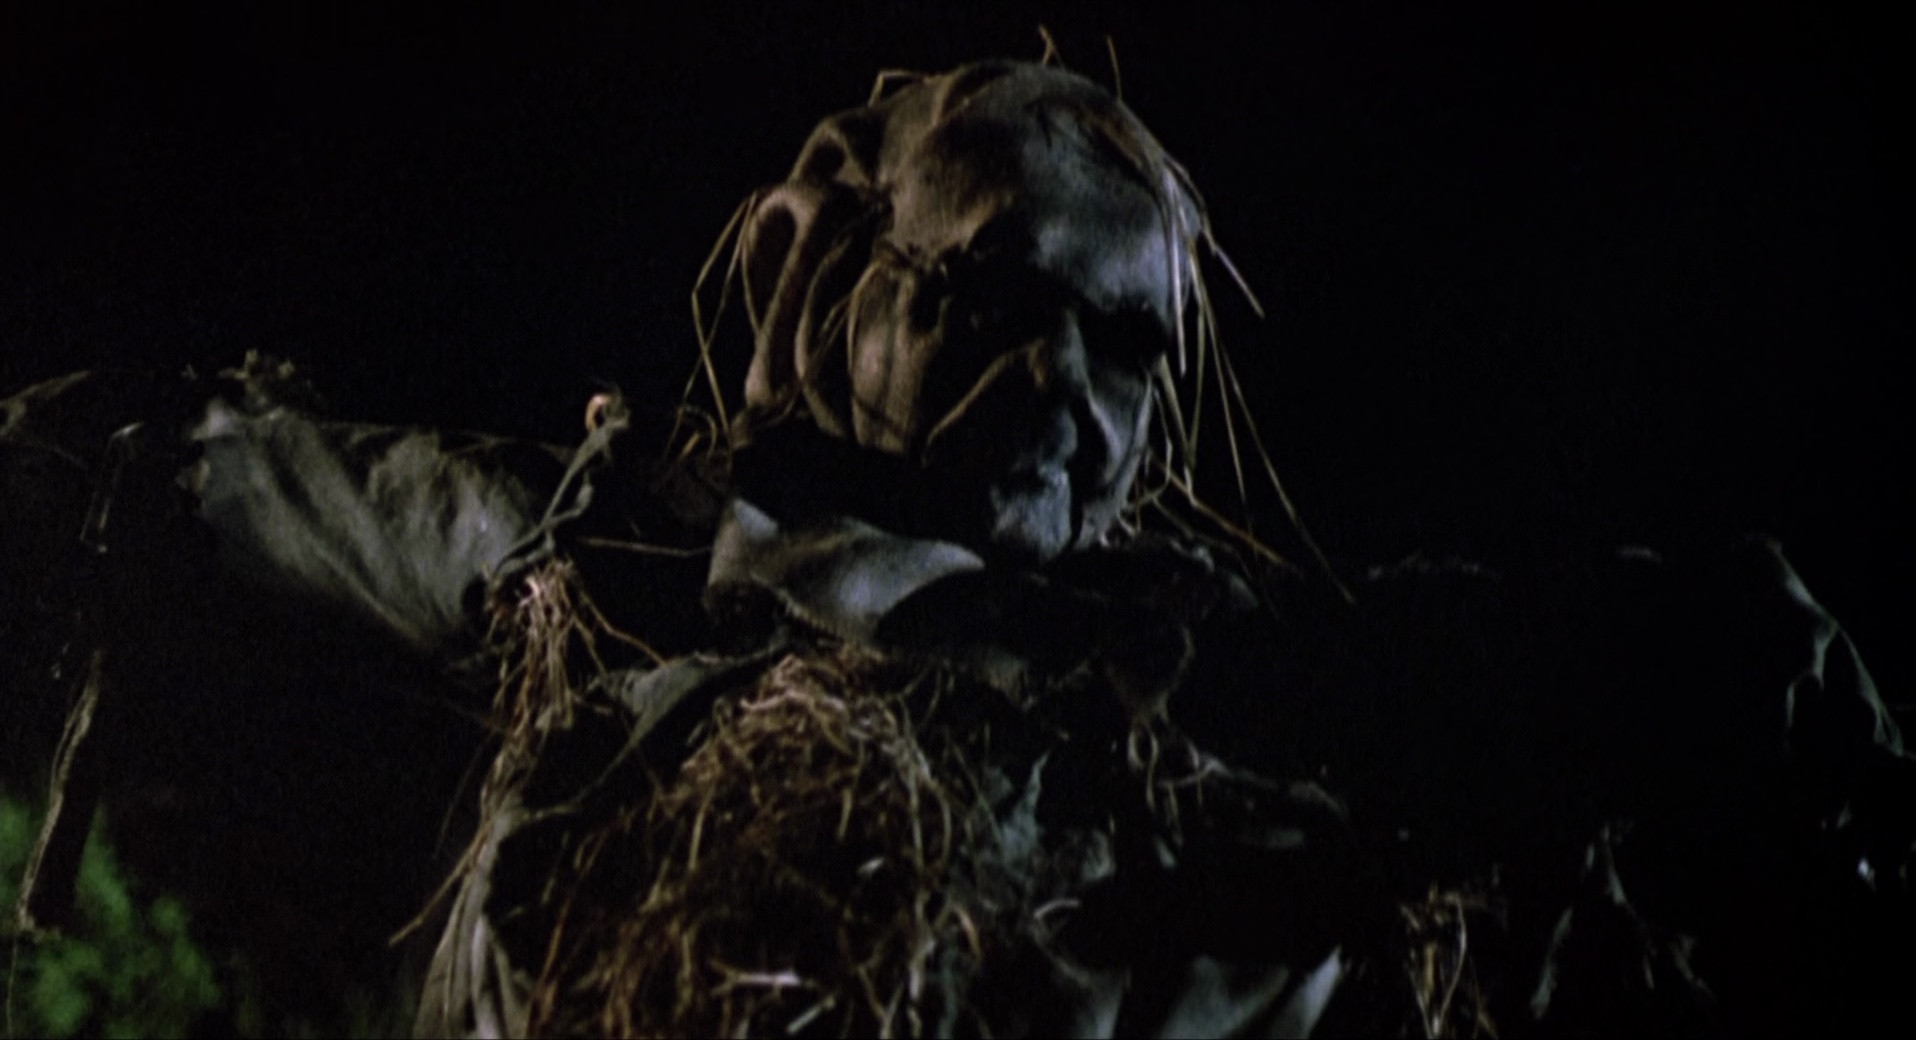 Scarecrows 1988 SF Remastered 1080p BluRay x265 HEVC 10bit AAC 5 1 Commentary William Wesley Ted Vernon Michael David Simms Richard Vidan Kristin